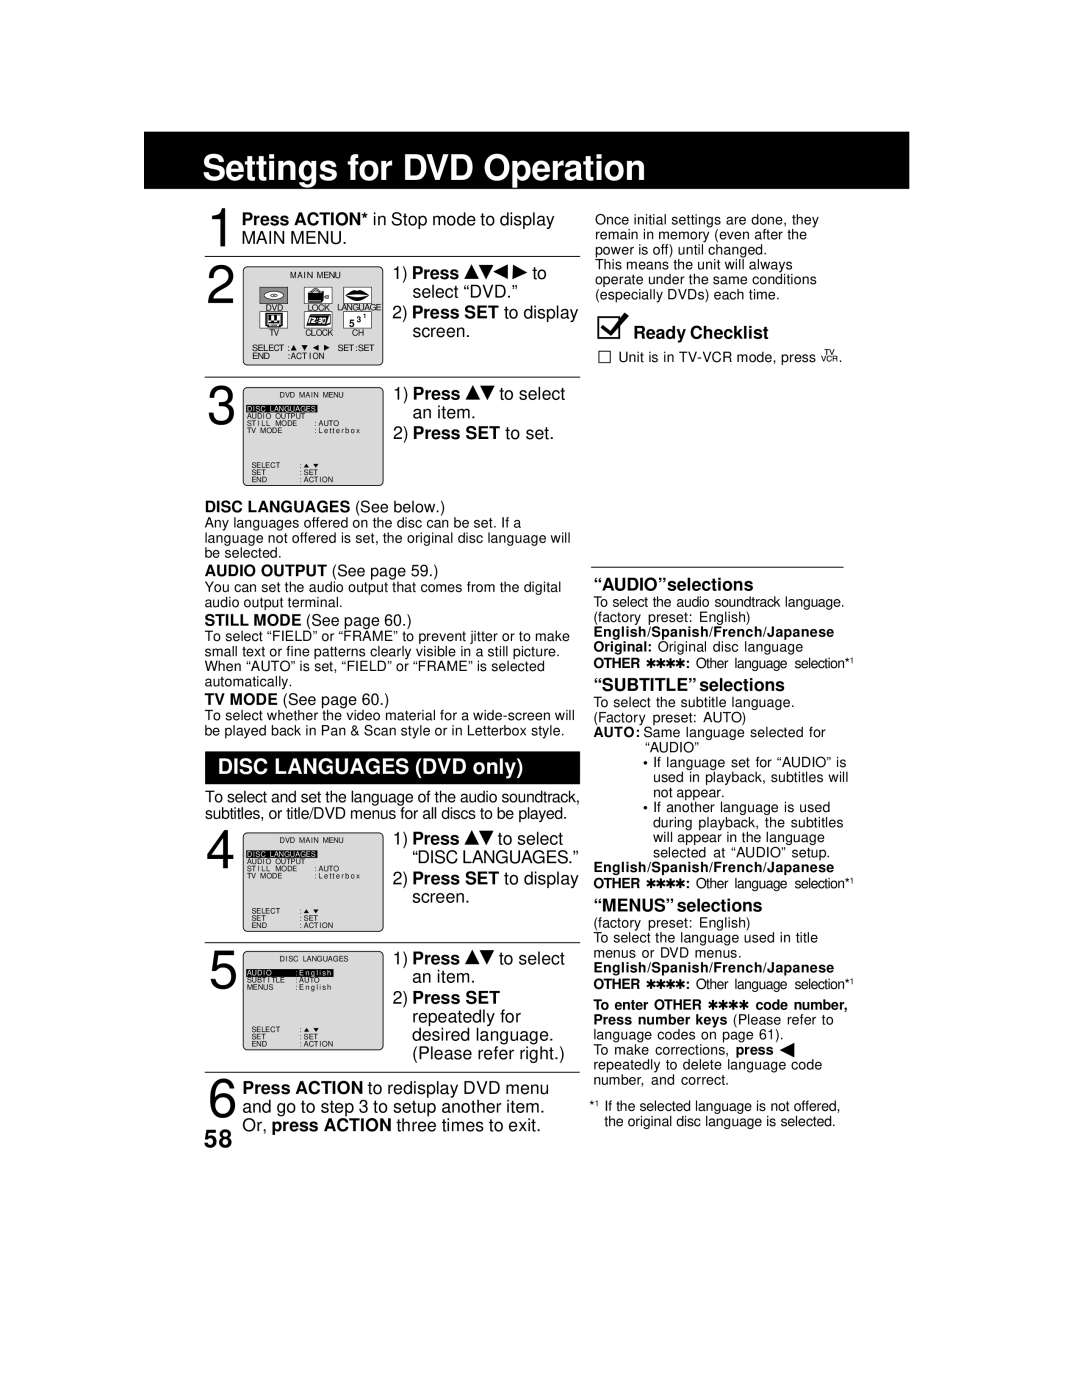 Panasonic AG 527DVDE Settings for DVD Operation, DISC LANGUAGES DVD only, “AUDIO”selections, “SUBTITLE” selections, Press 